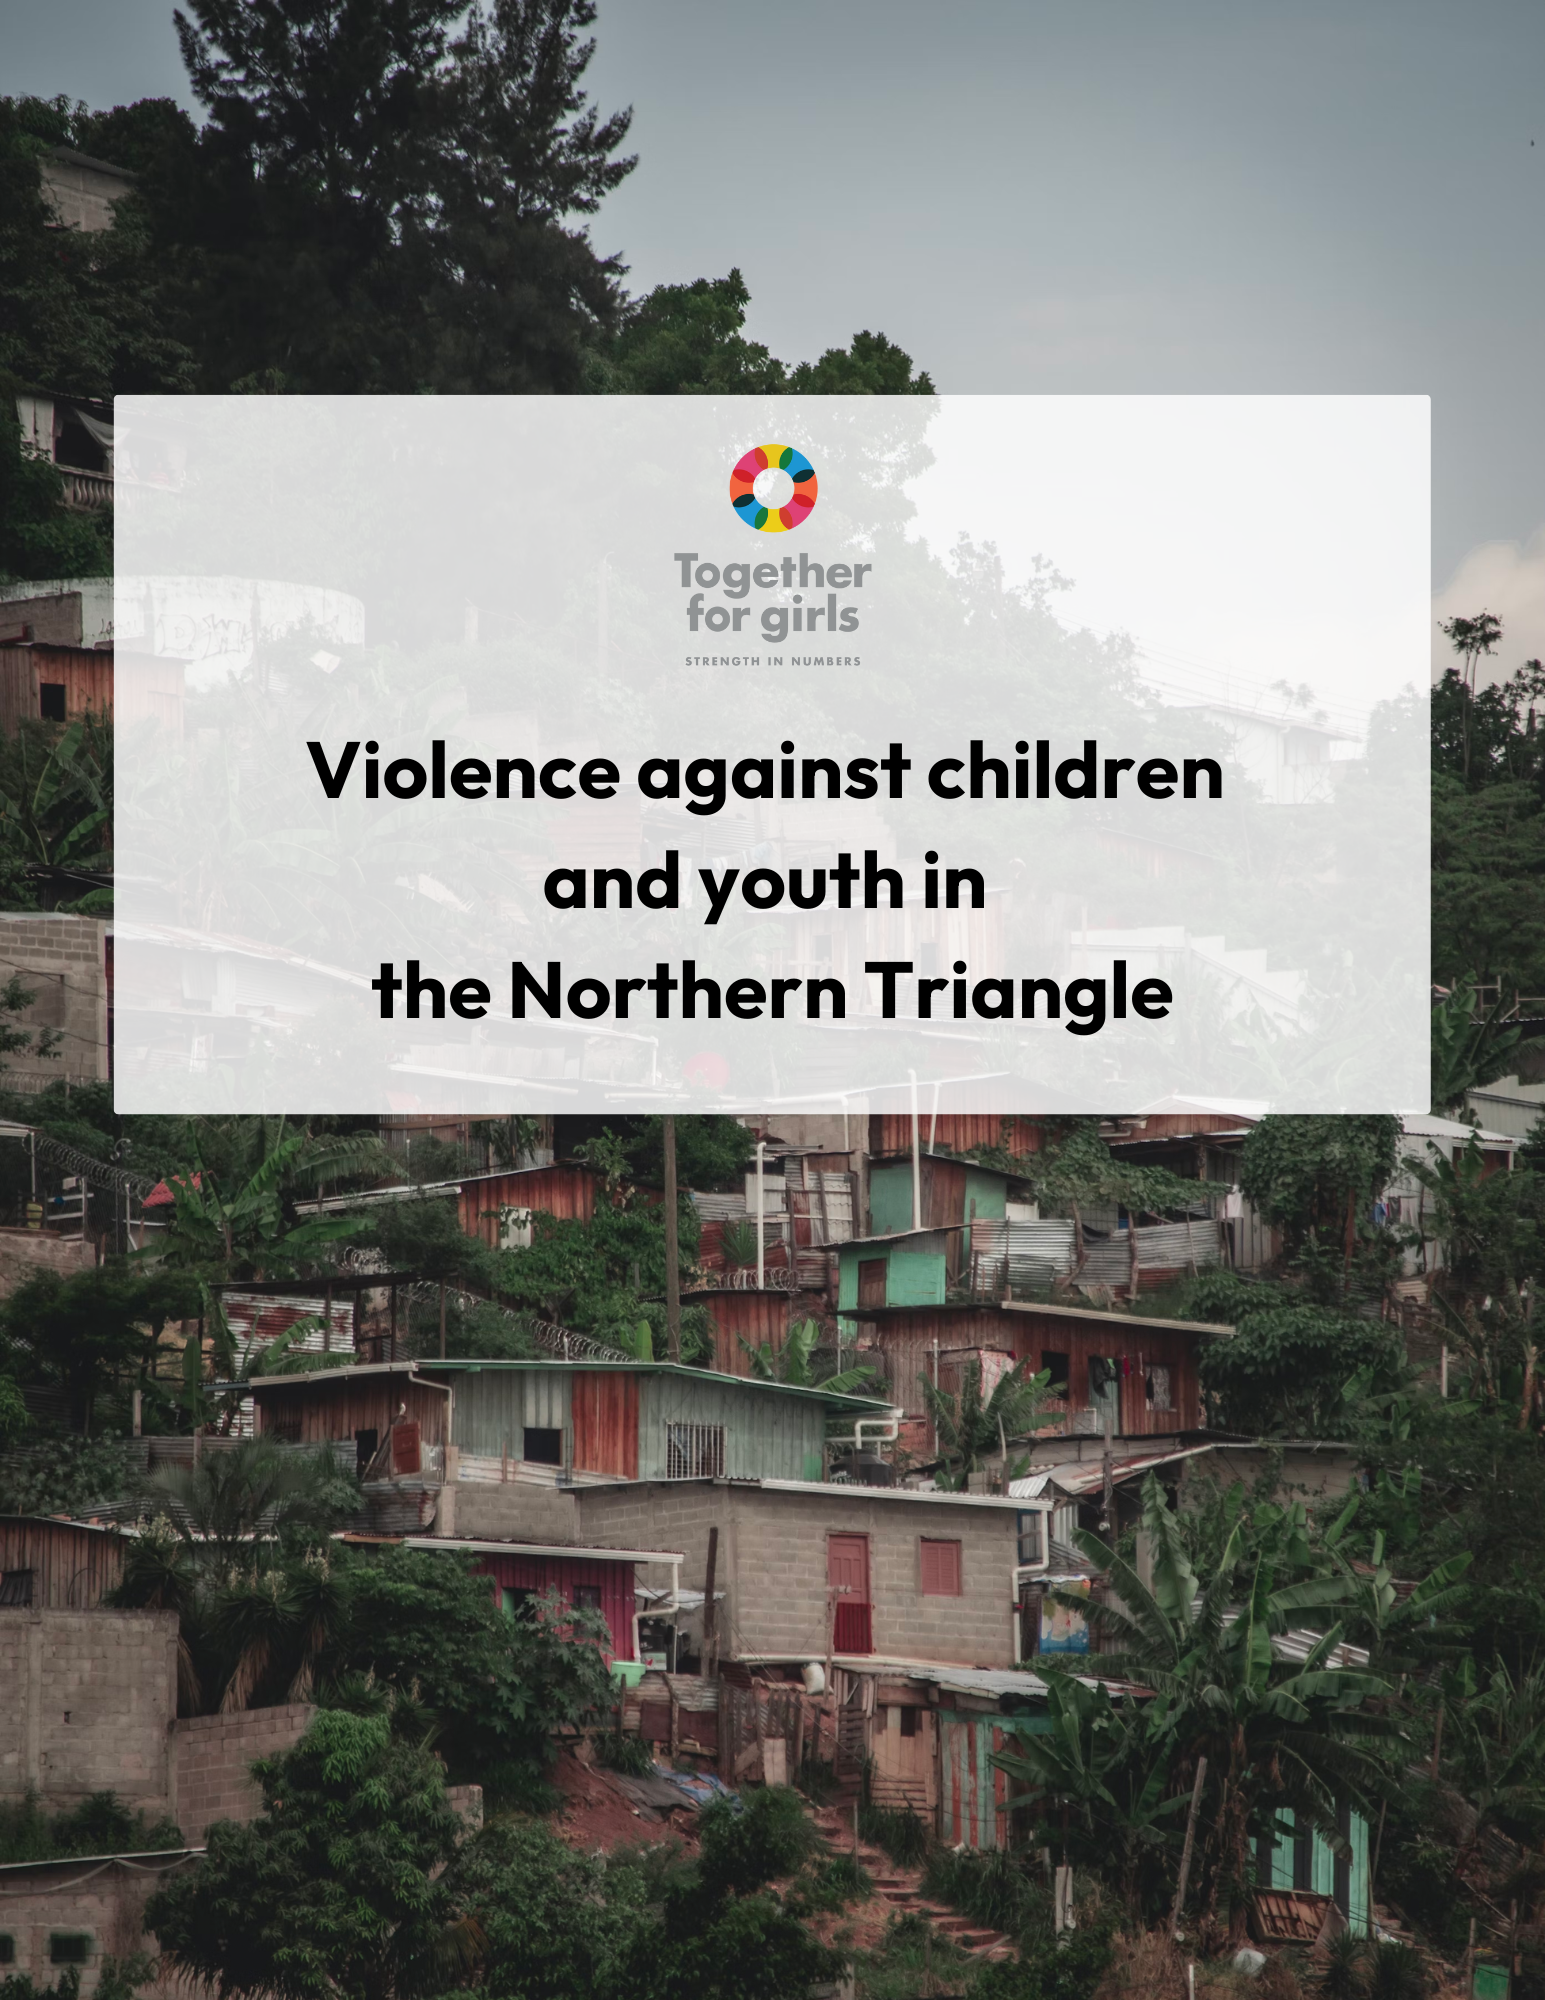 Violence against children and youth in the Northern Triangle